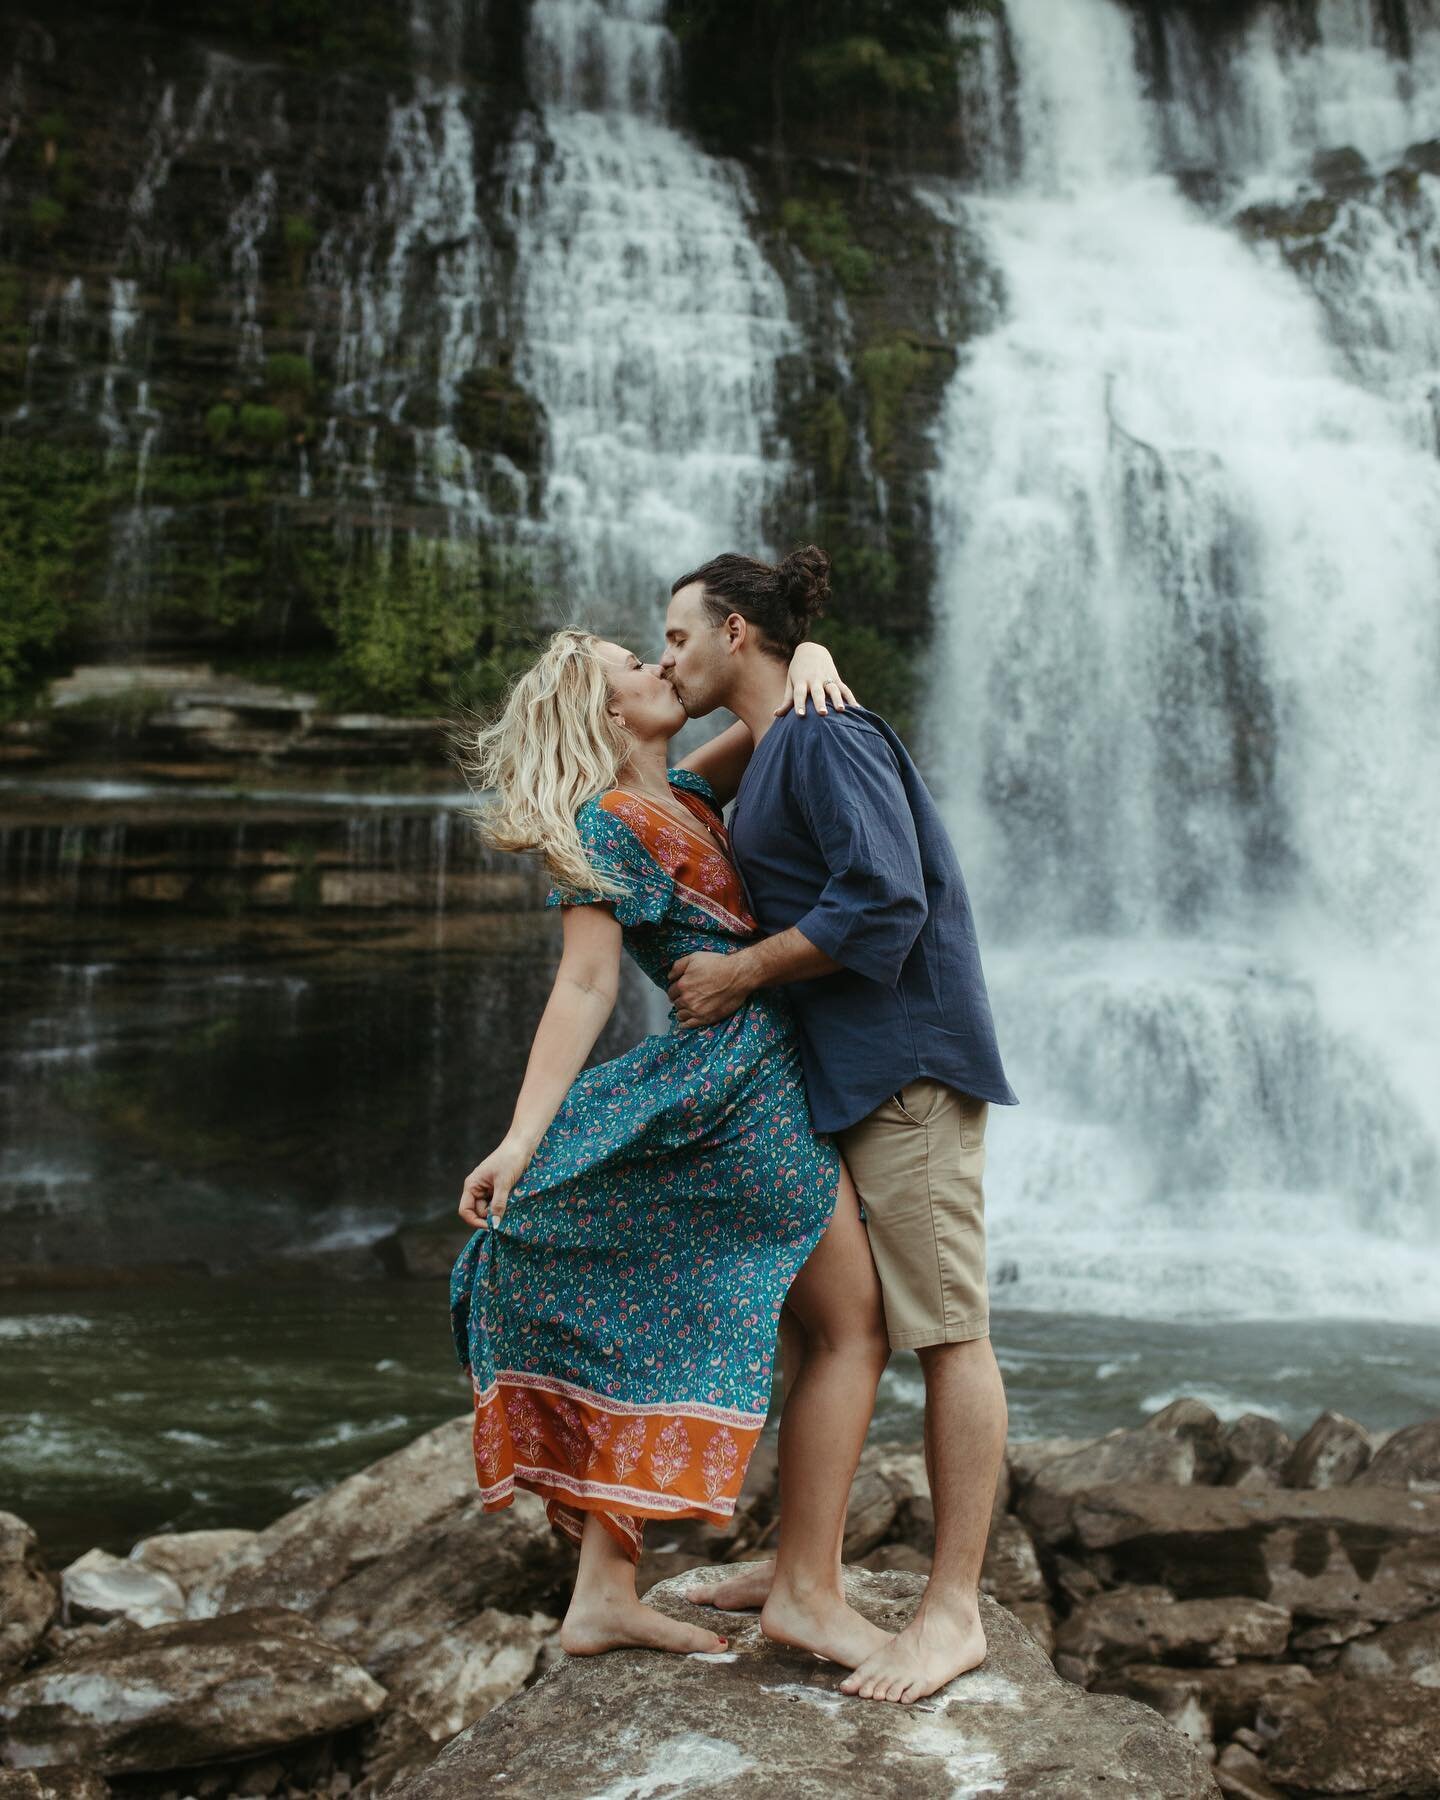 I have just recently started to explore Tennessee&rsquo;s waterfalls and they are beautiful 👏🏻👏🏻👏🏻
.
#rockislandstatepark #waterfall  #engagementphotos #tennessee #nashvilleweddingphotography #nashvillephotographer #photobugcommunity